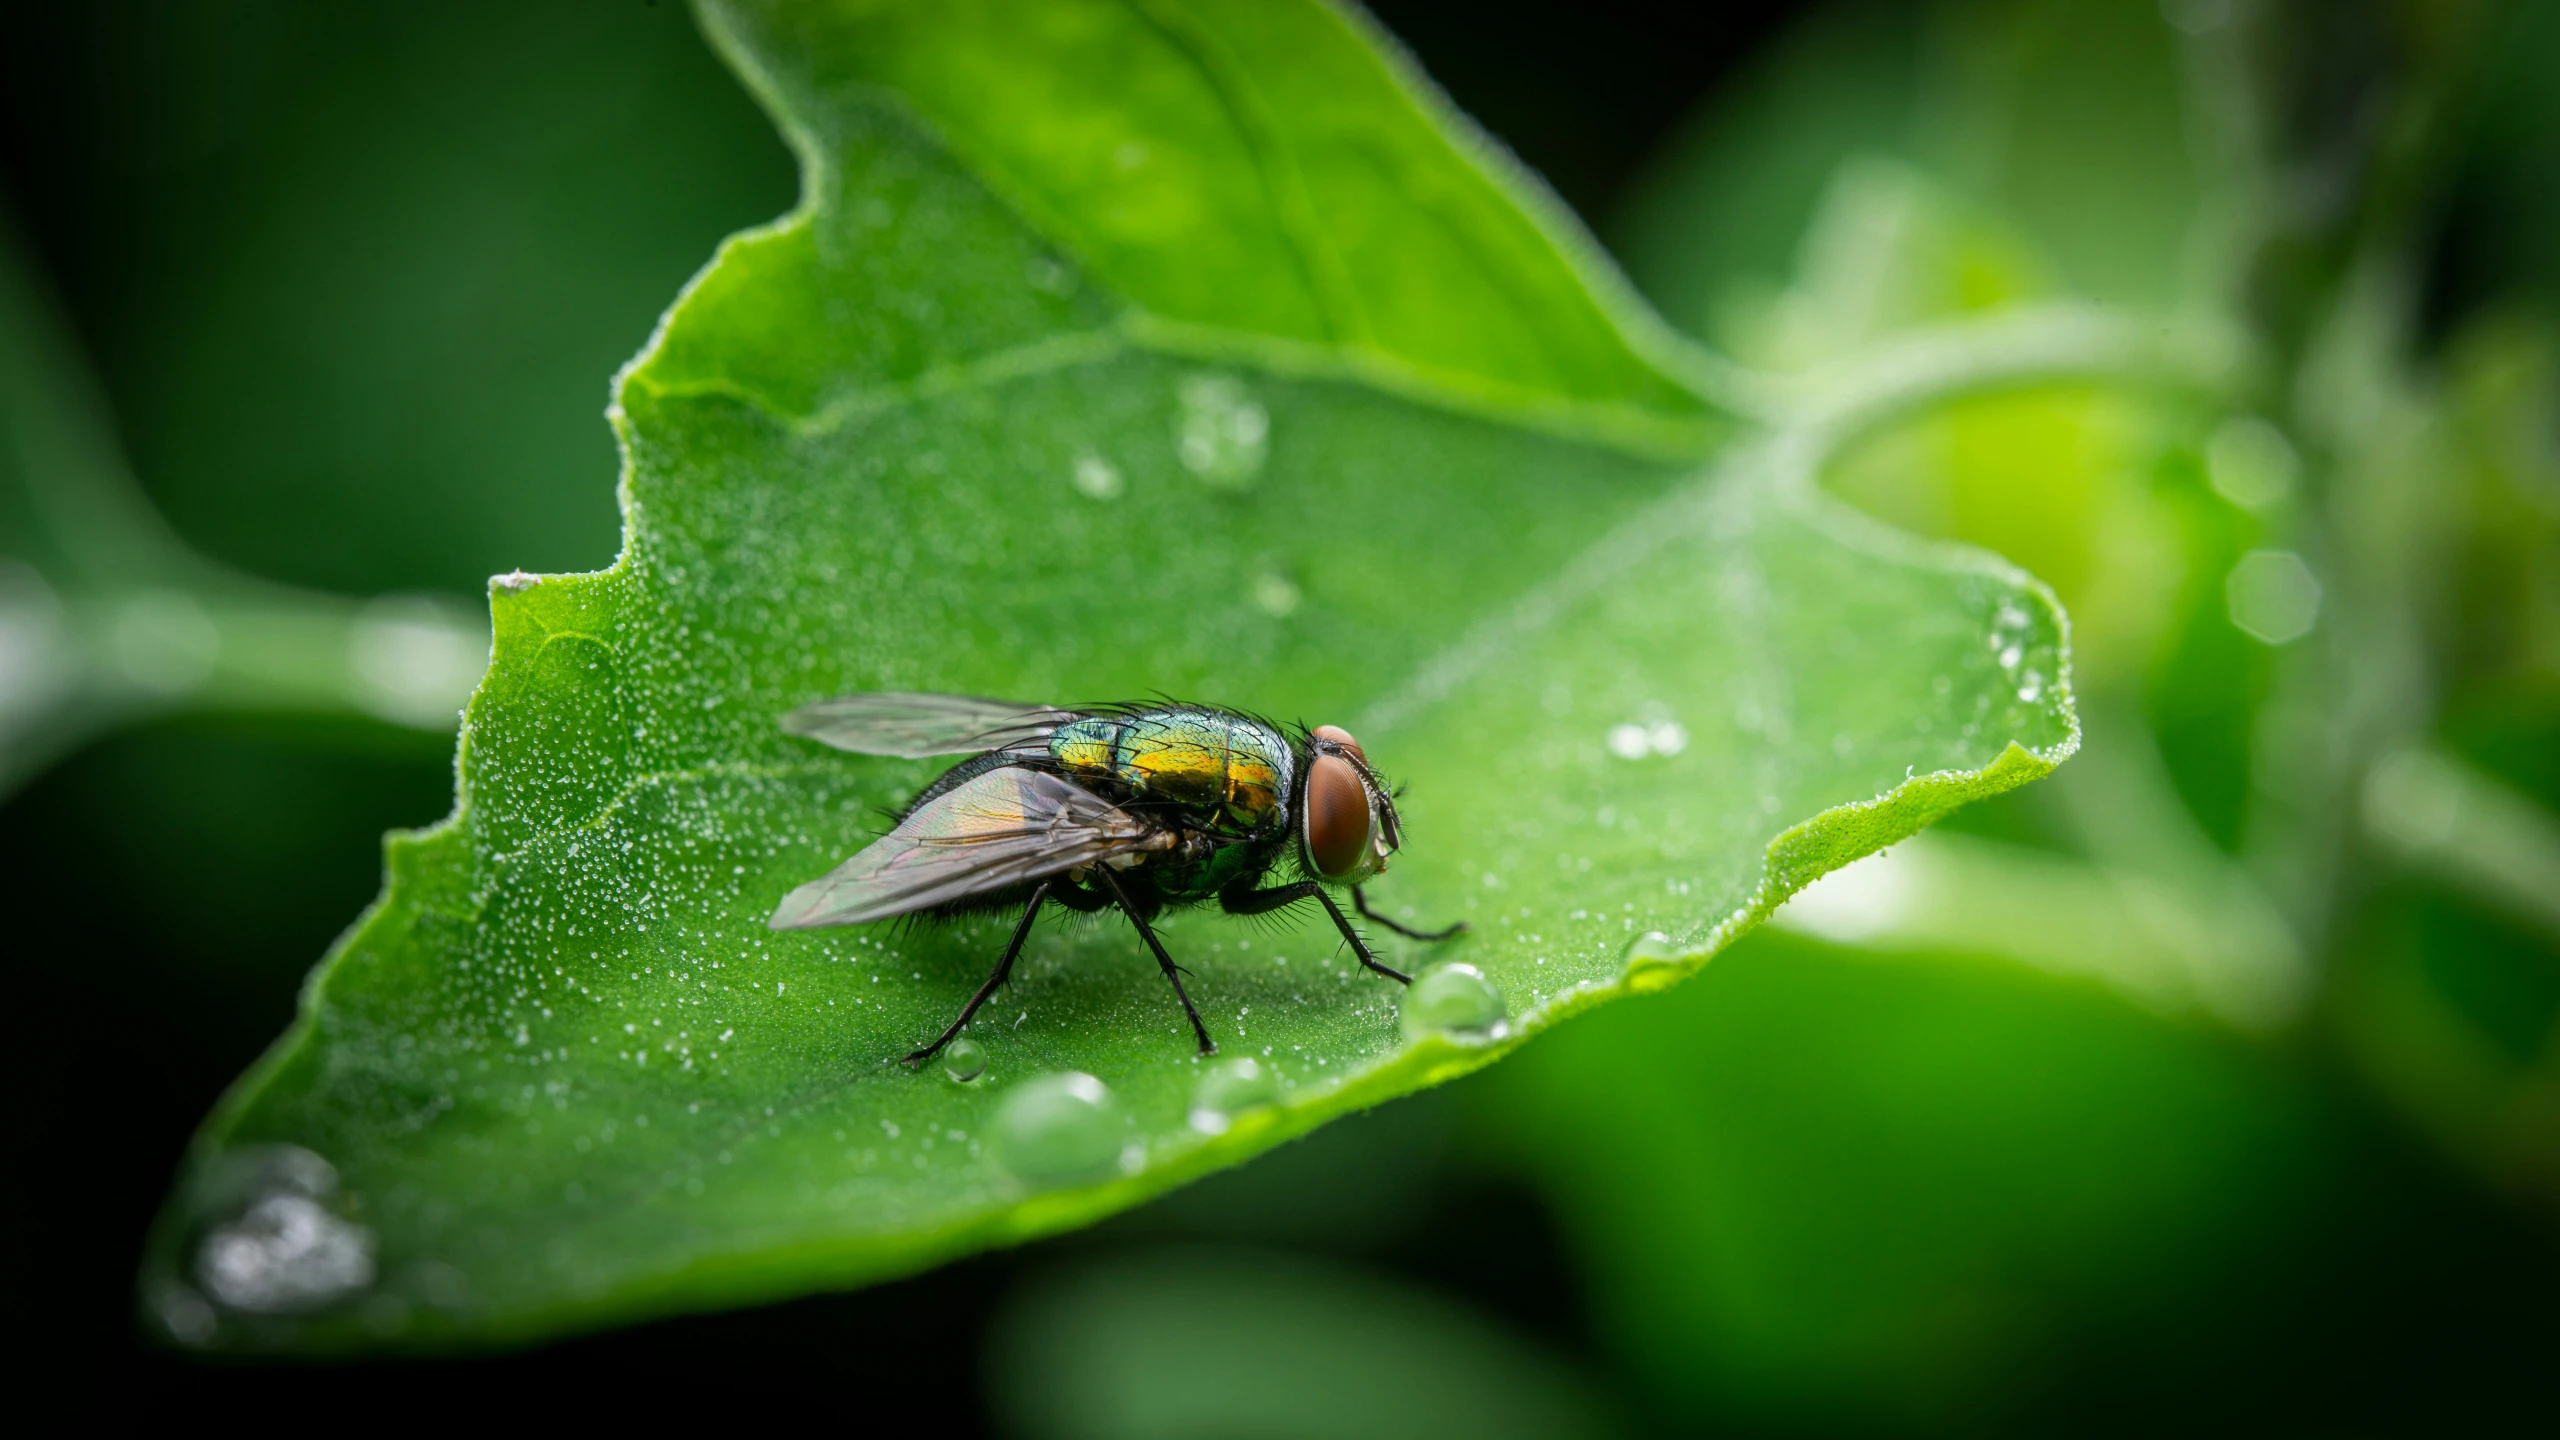 the fly is sitting on the green leaf